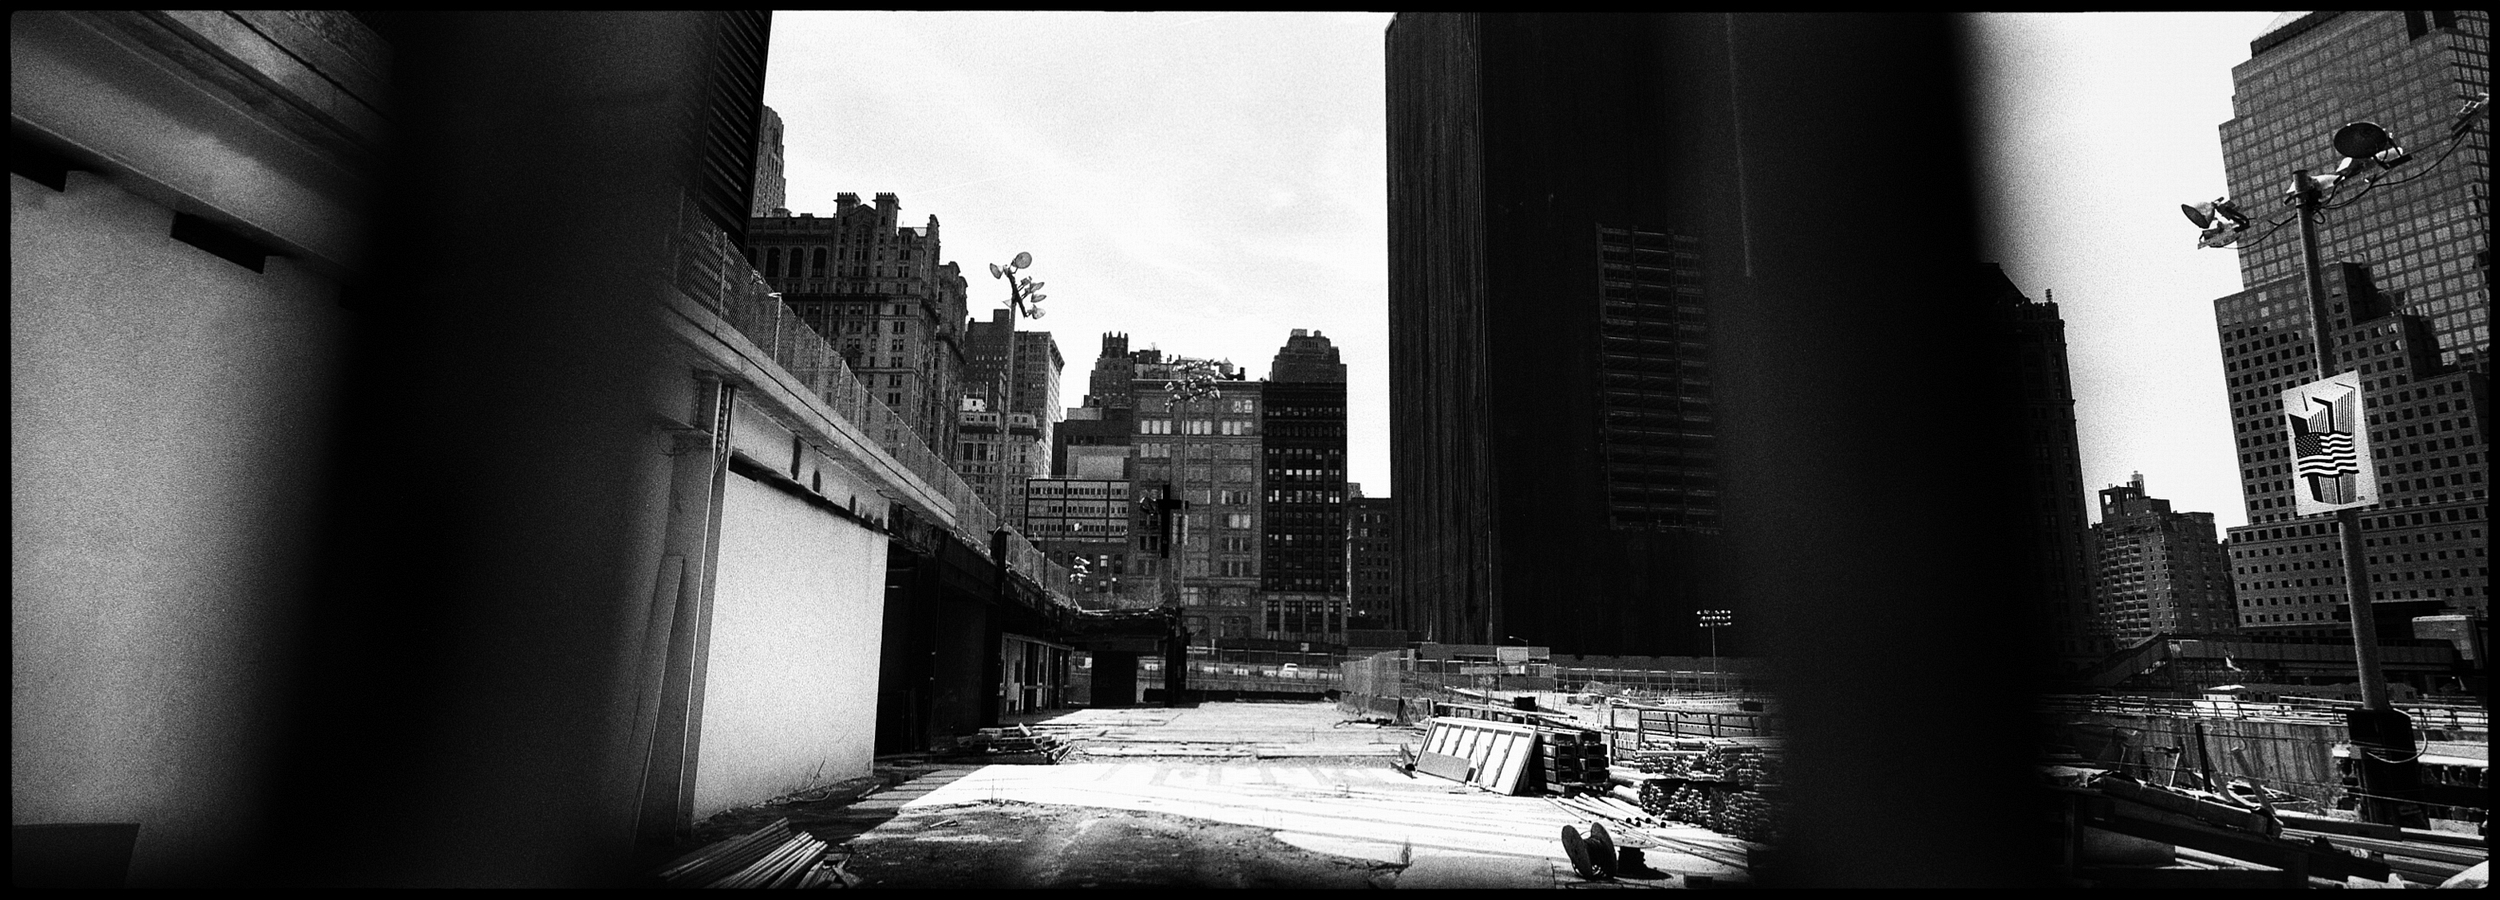 All pictures © Cyril Fakiri - No use without permission.Ground Zero Area , New-York City April 2006 All pictures © Cyril Fakiri - No use without permission.